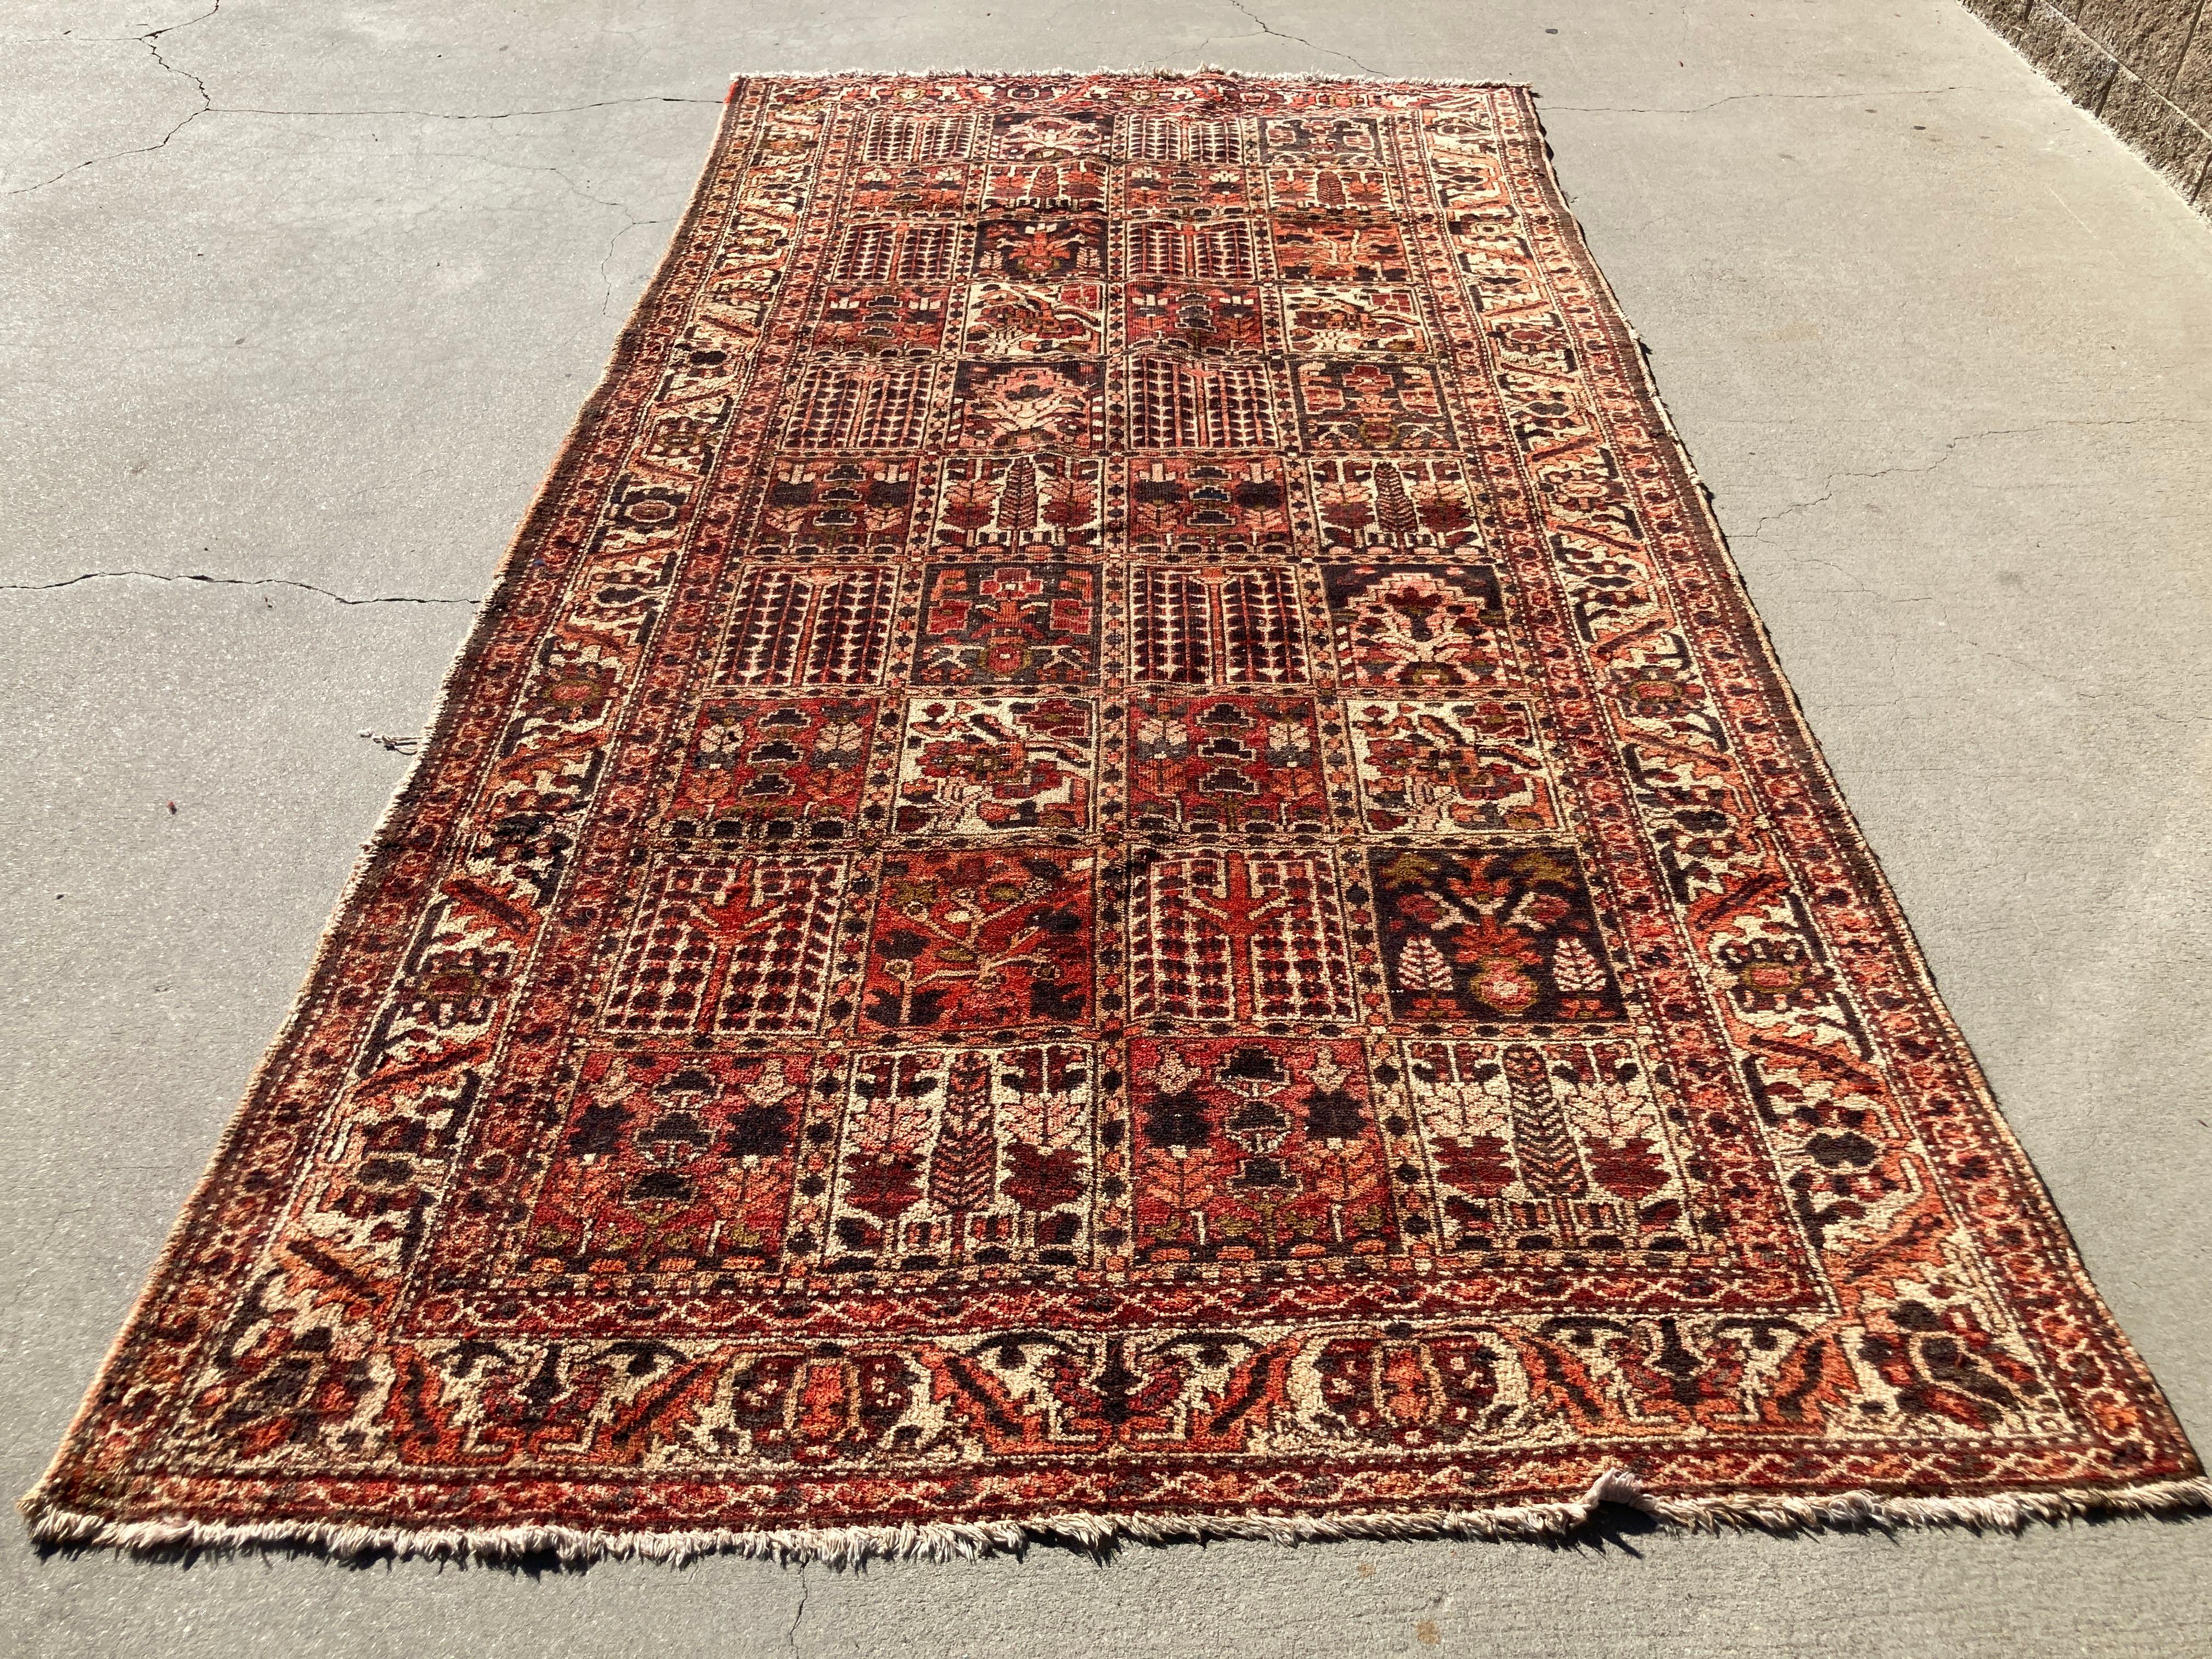 Antique hand-knotted rug from Eastern Turkey,
circa 1940.
Size: 3 ft 9 in x 6 ft 5 in.
Traditional Turkish design and hearth colors in pink, rust, grey and beige.
Flat pile rug with geometrical designs.